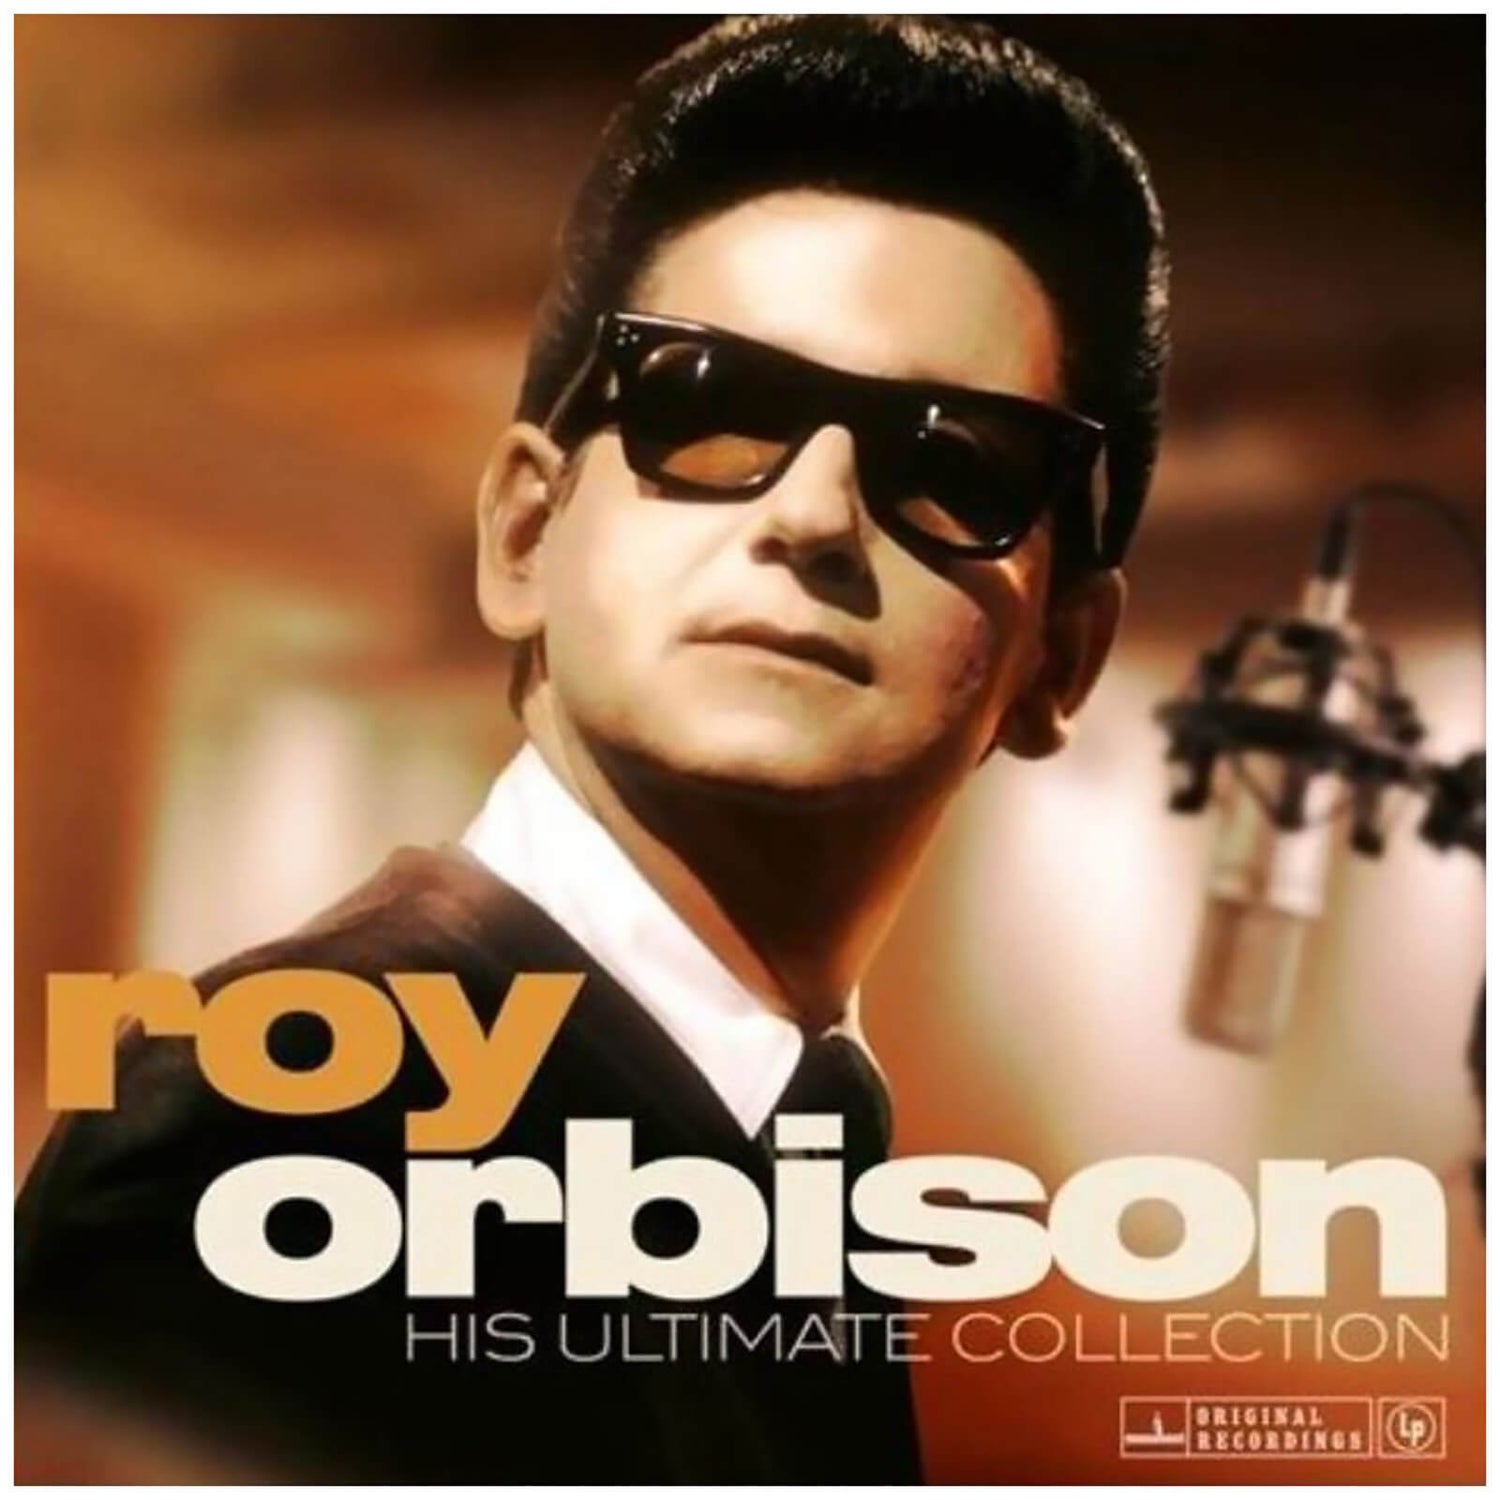 Roy Orbison - His Ultimate Collection Vinyl